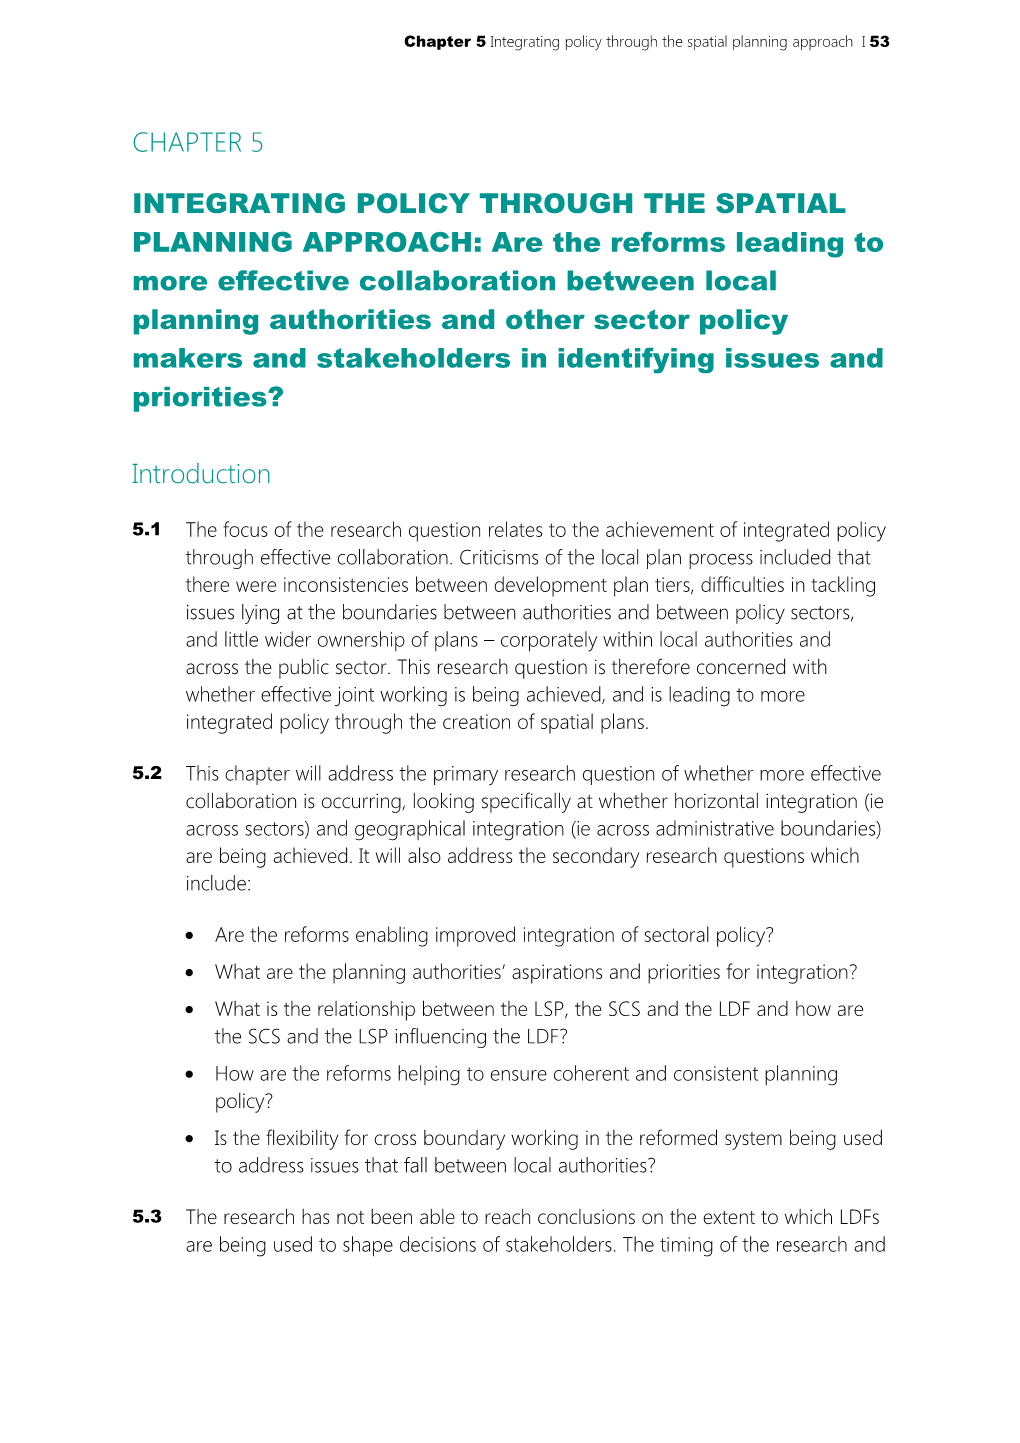 Chapter 5 Integrating Policy Through the Spatial Planning Approach I